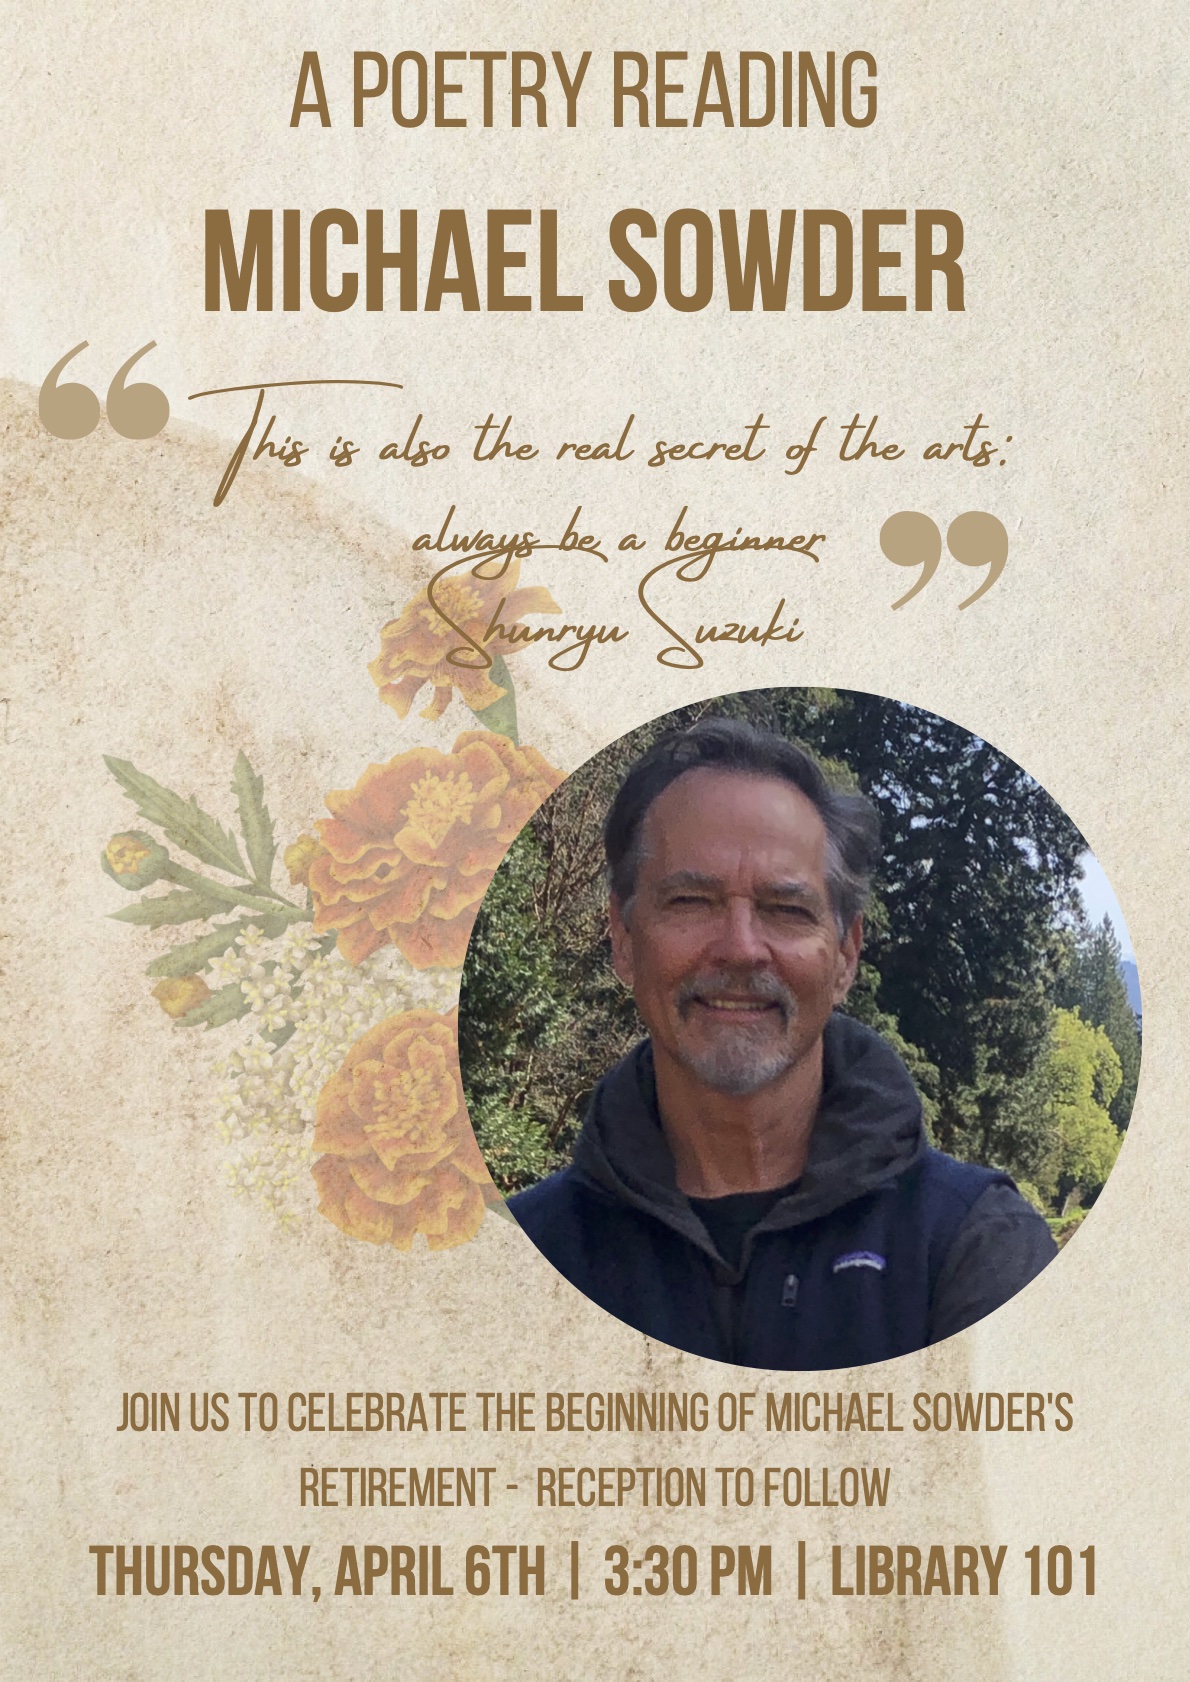 Michael Sowder Retirement Poetry Reading, Thursday, APRIL 6TH 1 3:30 PM | Library 101